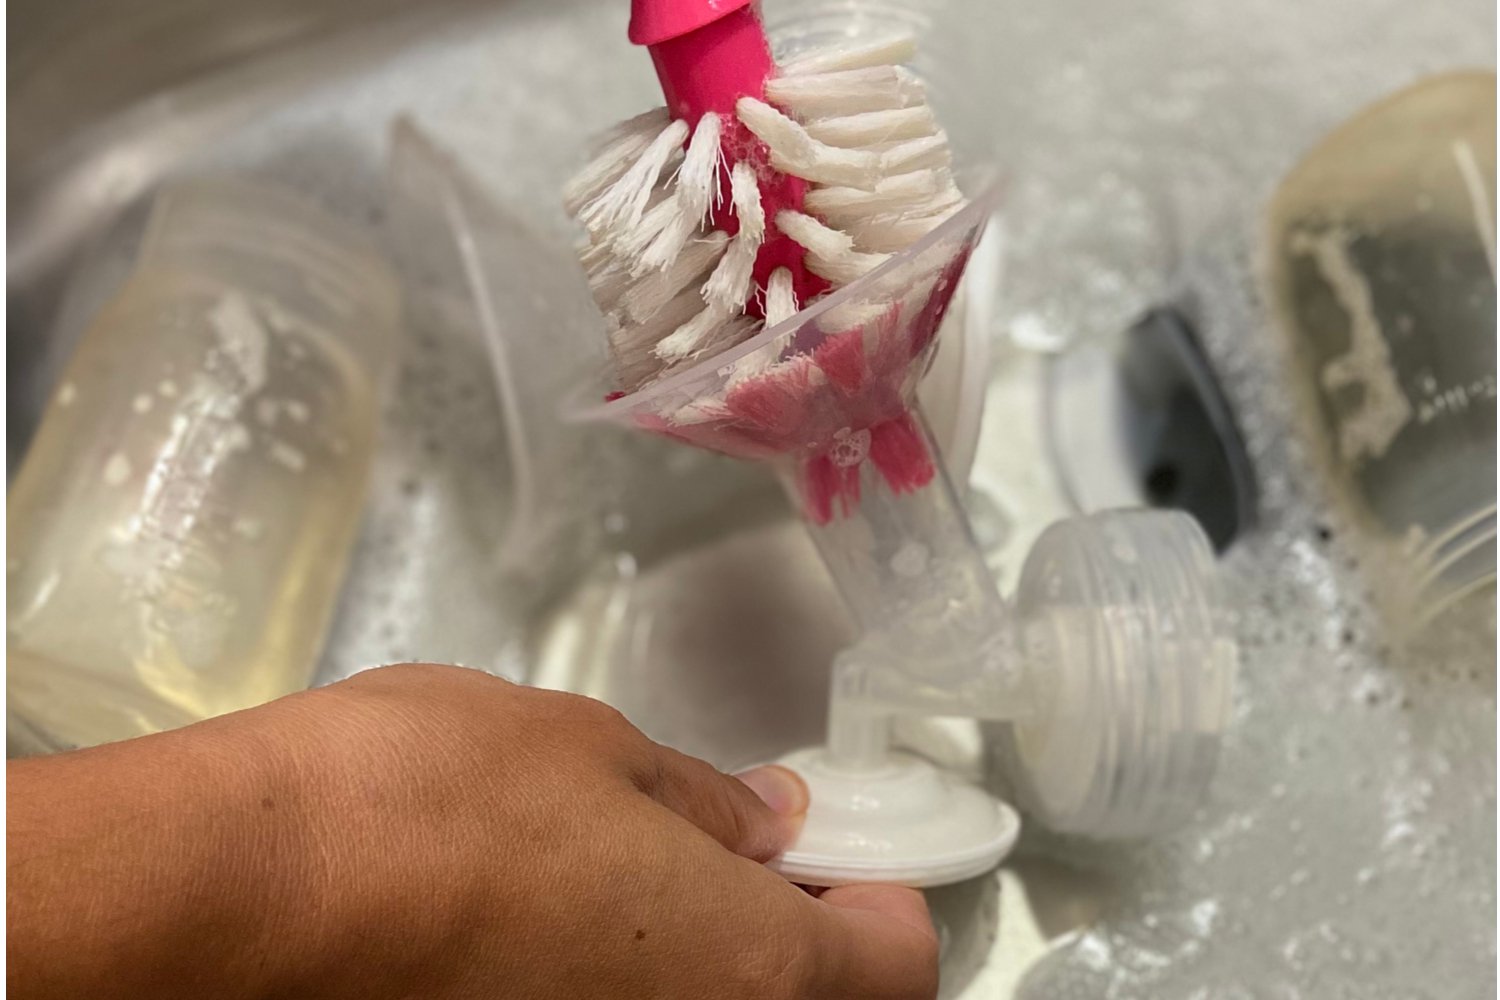 How Do You Clean a Breast Pump